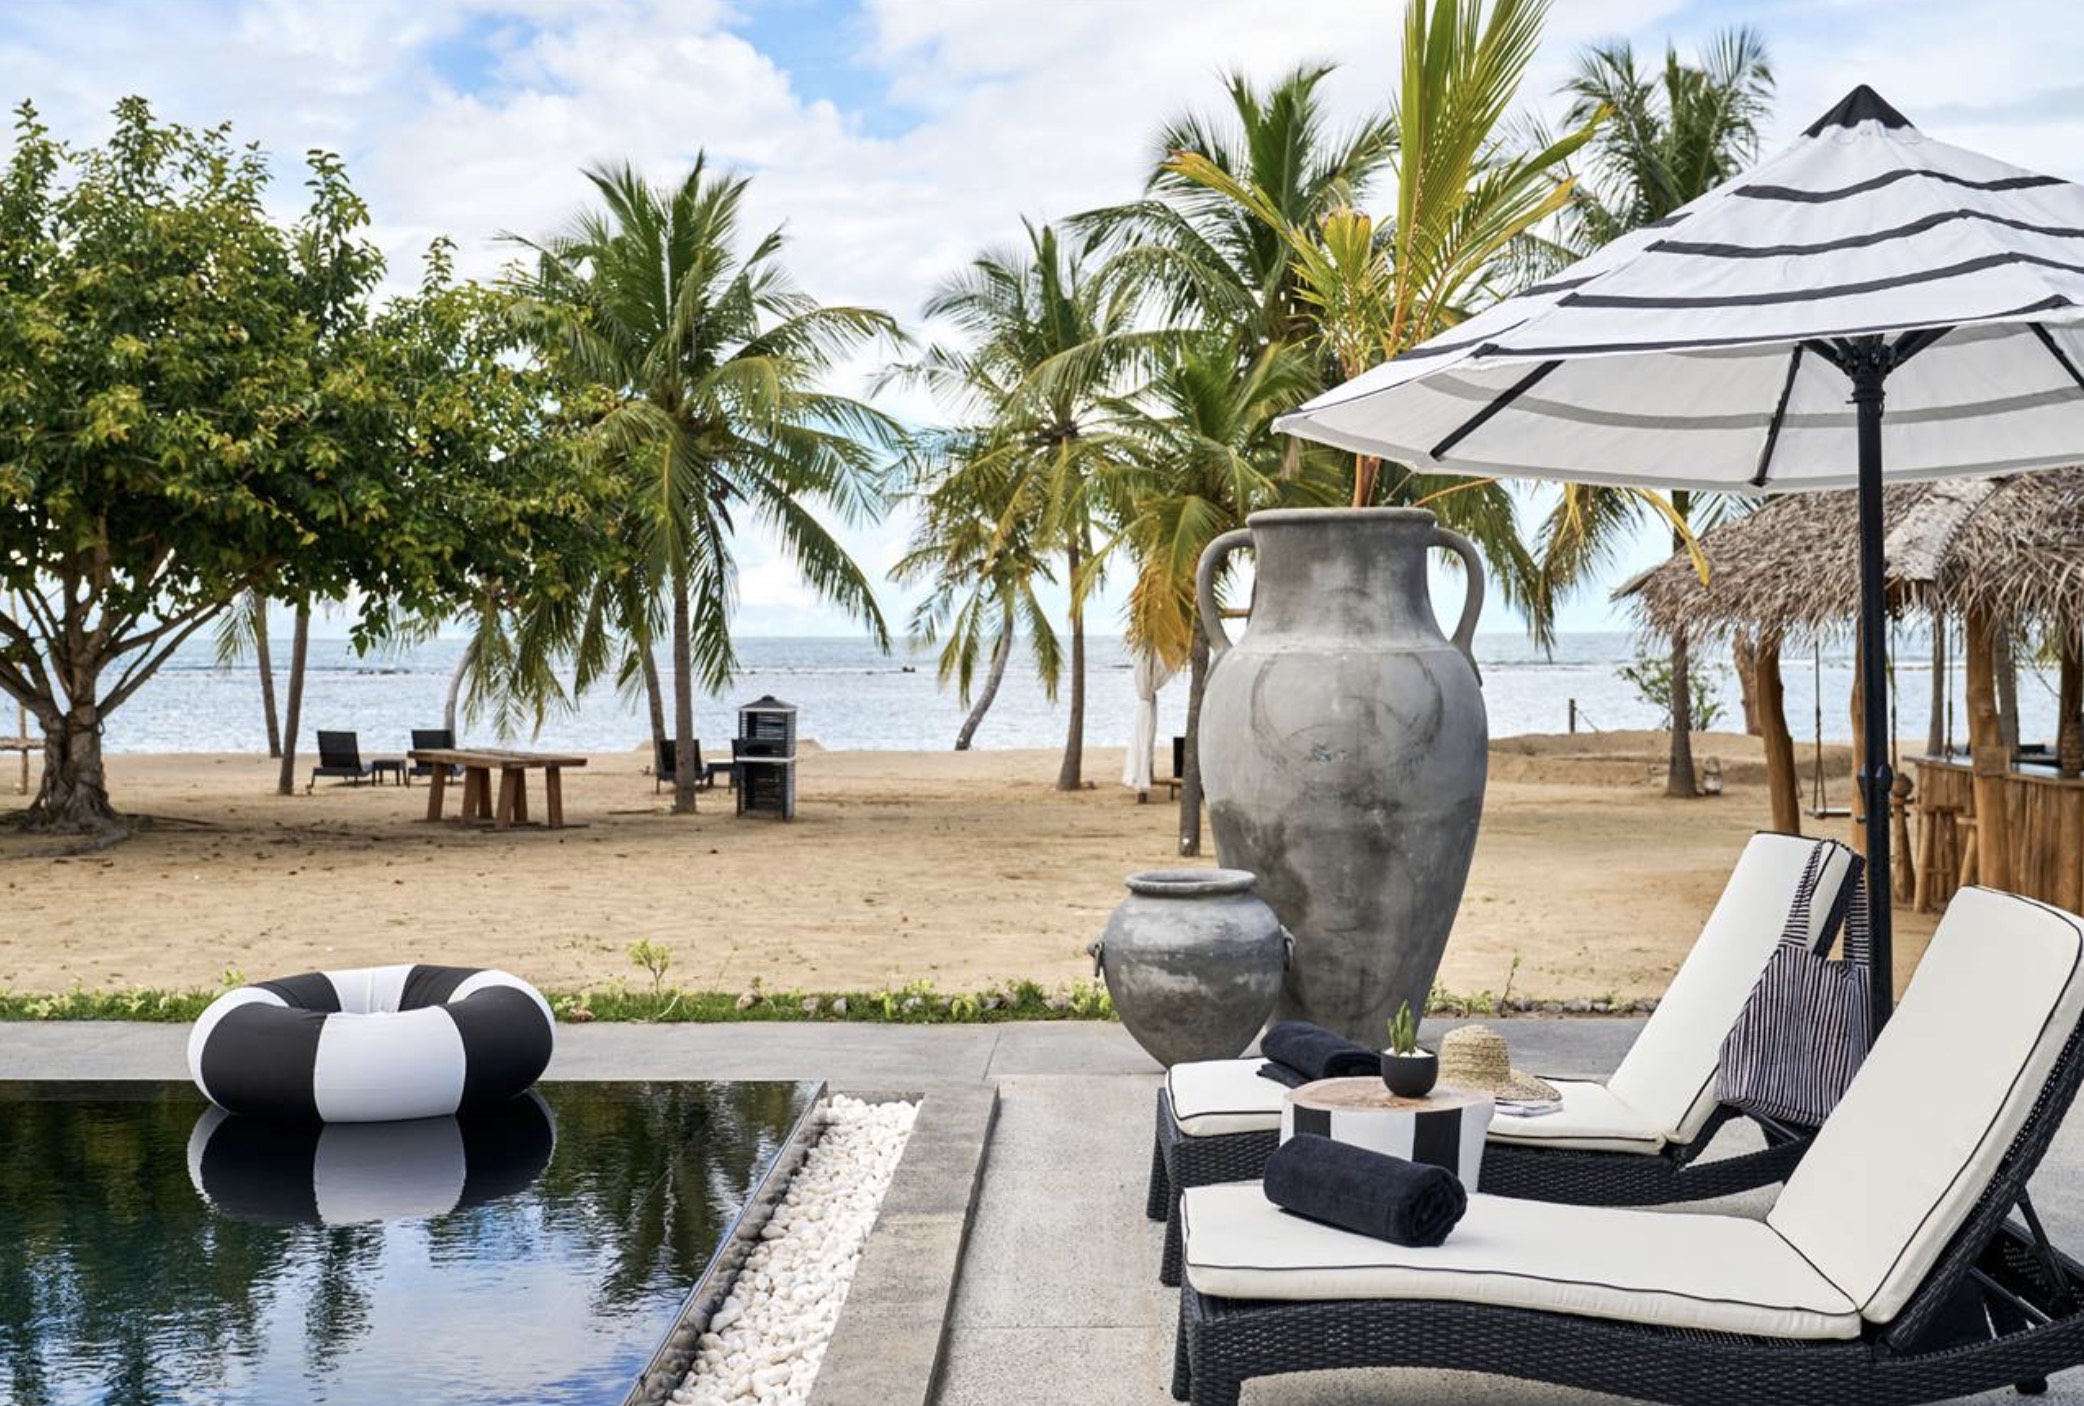 Sun Siyam Pasikudah announces exclusive offers for locals and residents for the April season